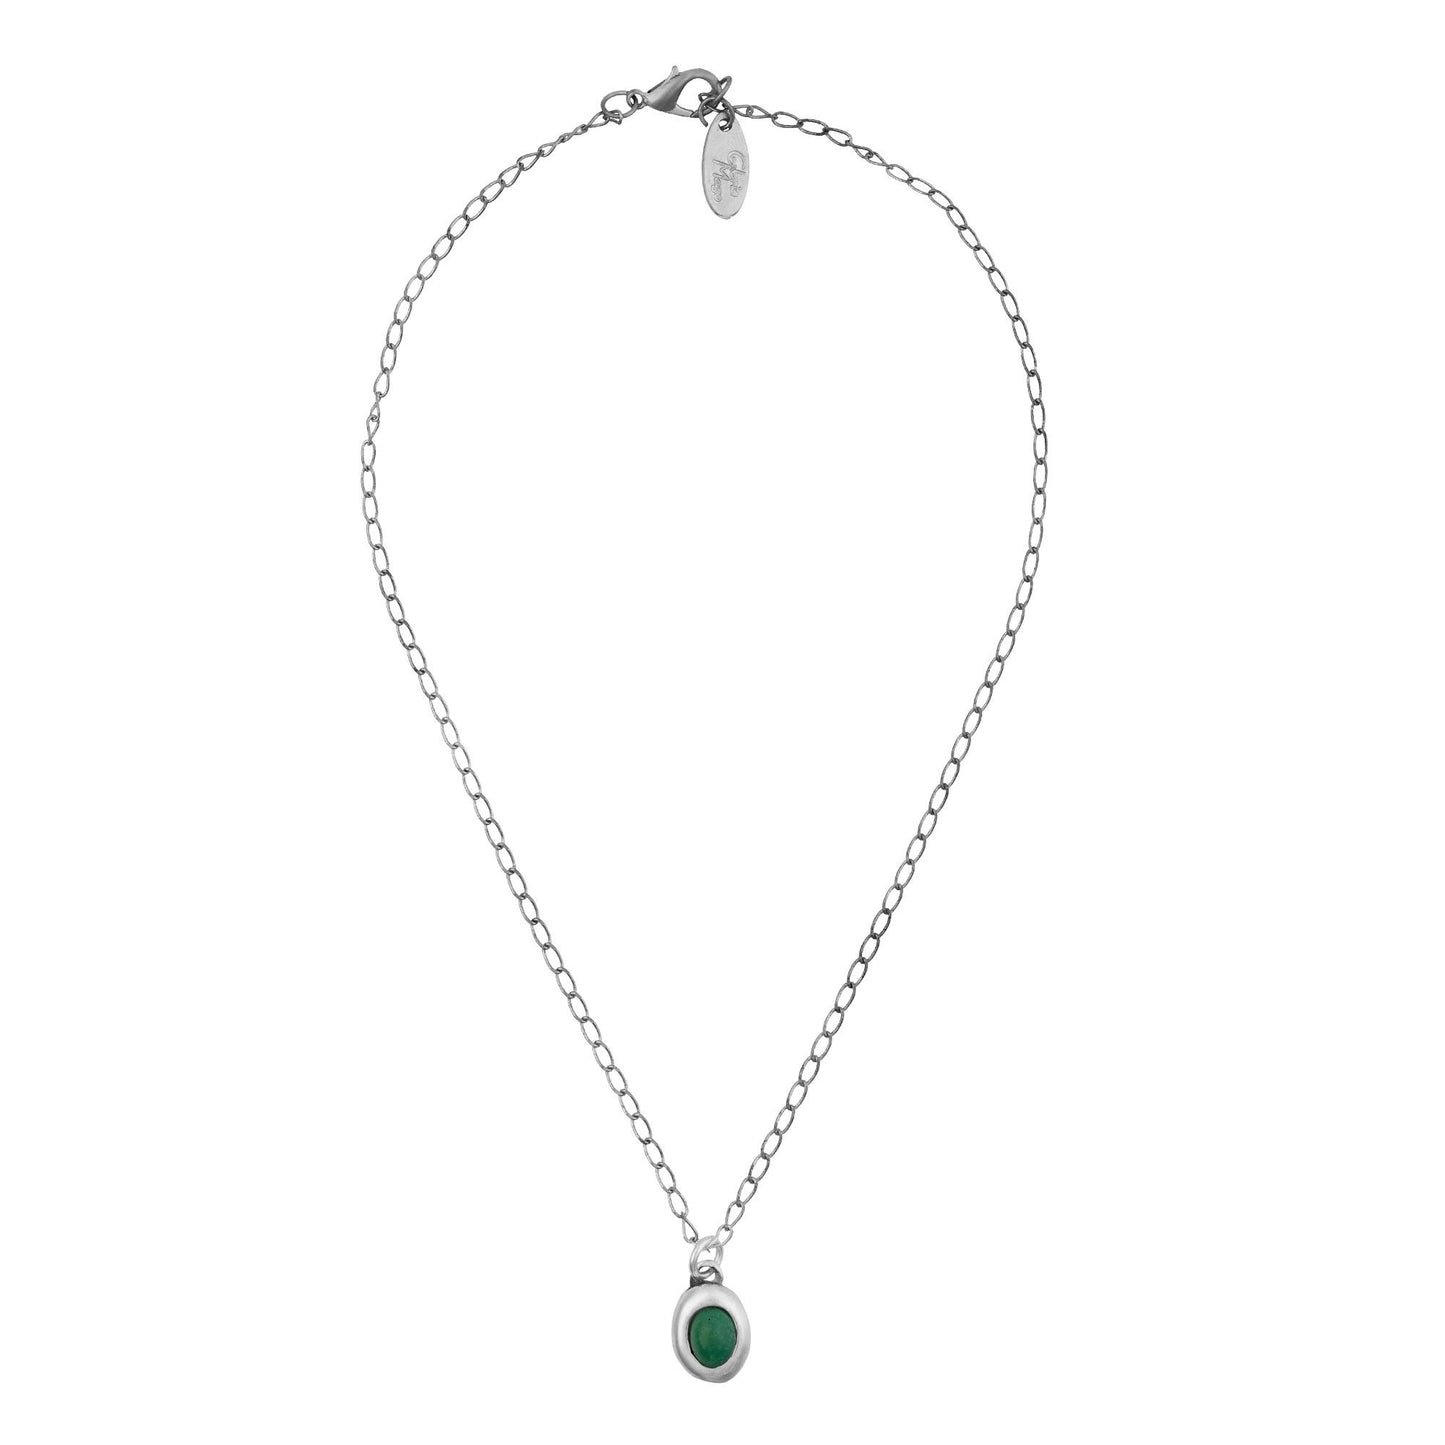 Emerald resin plated silver chain necklace